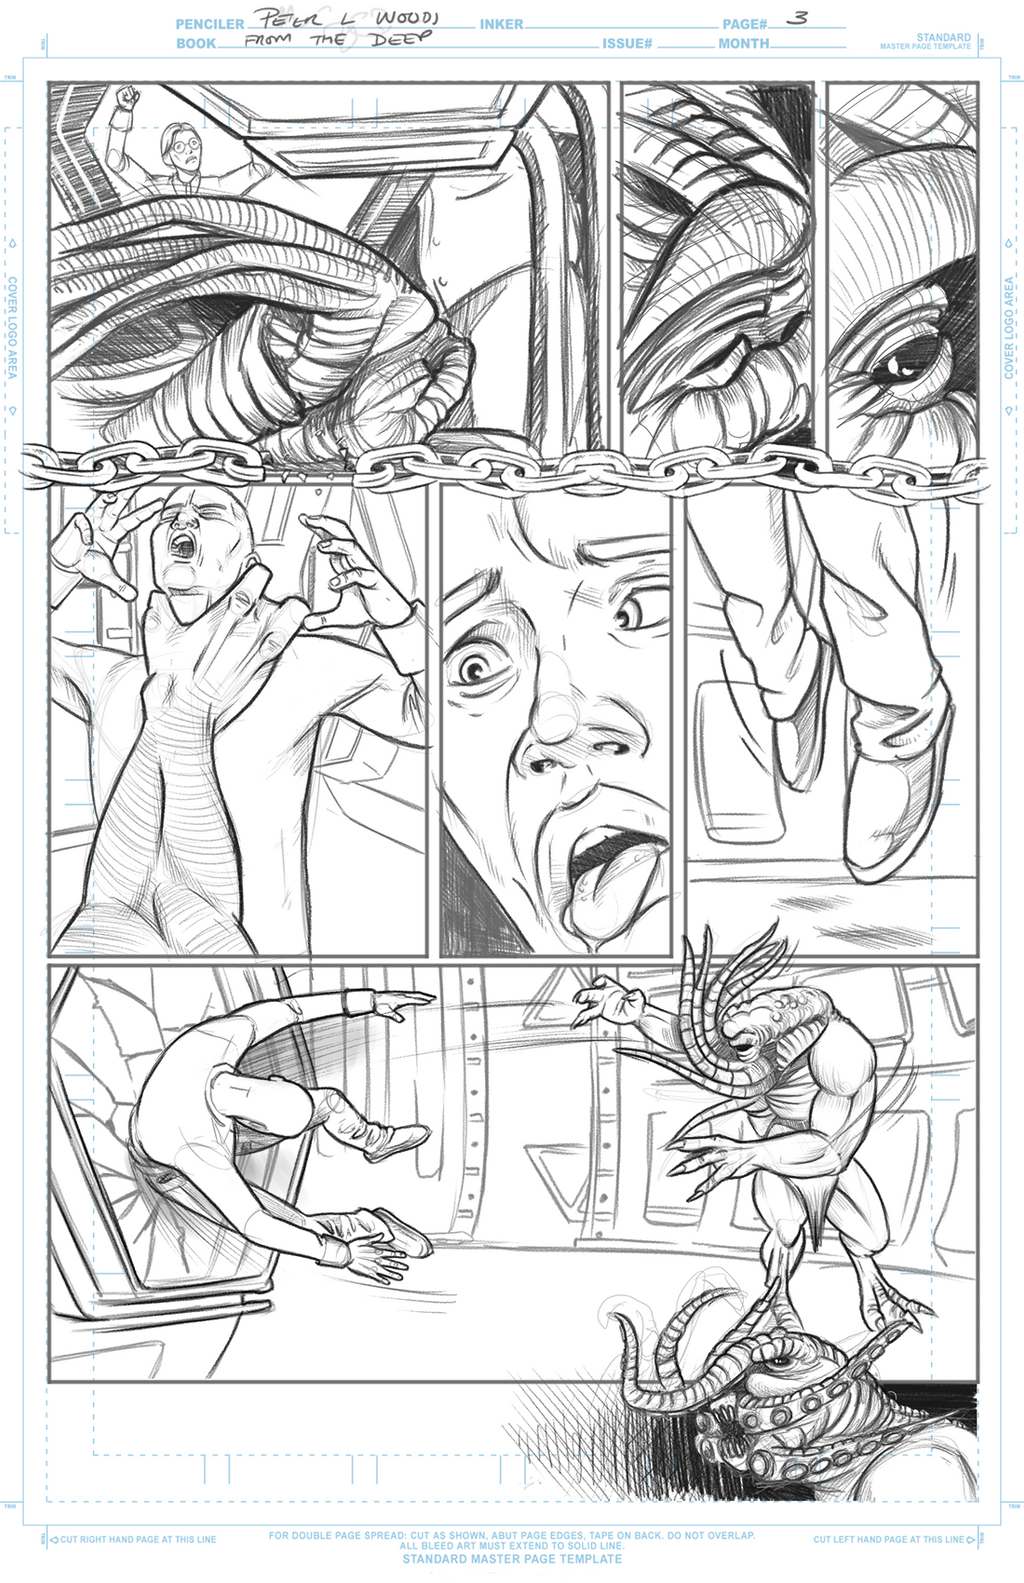 From The Depths - page 03 (Pencils)